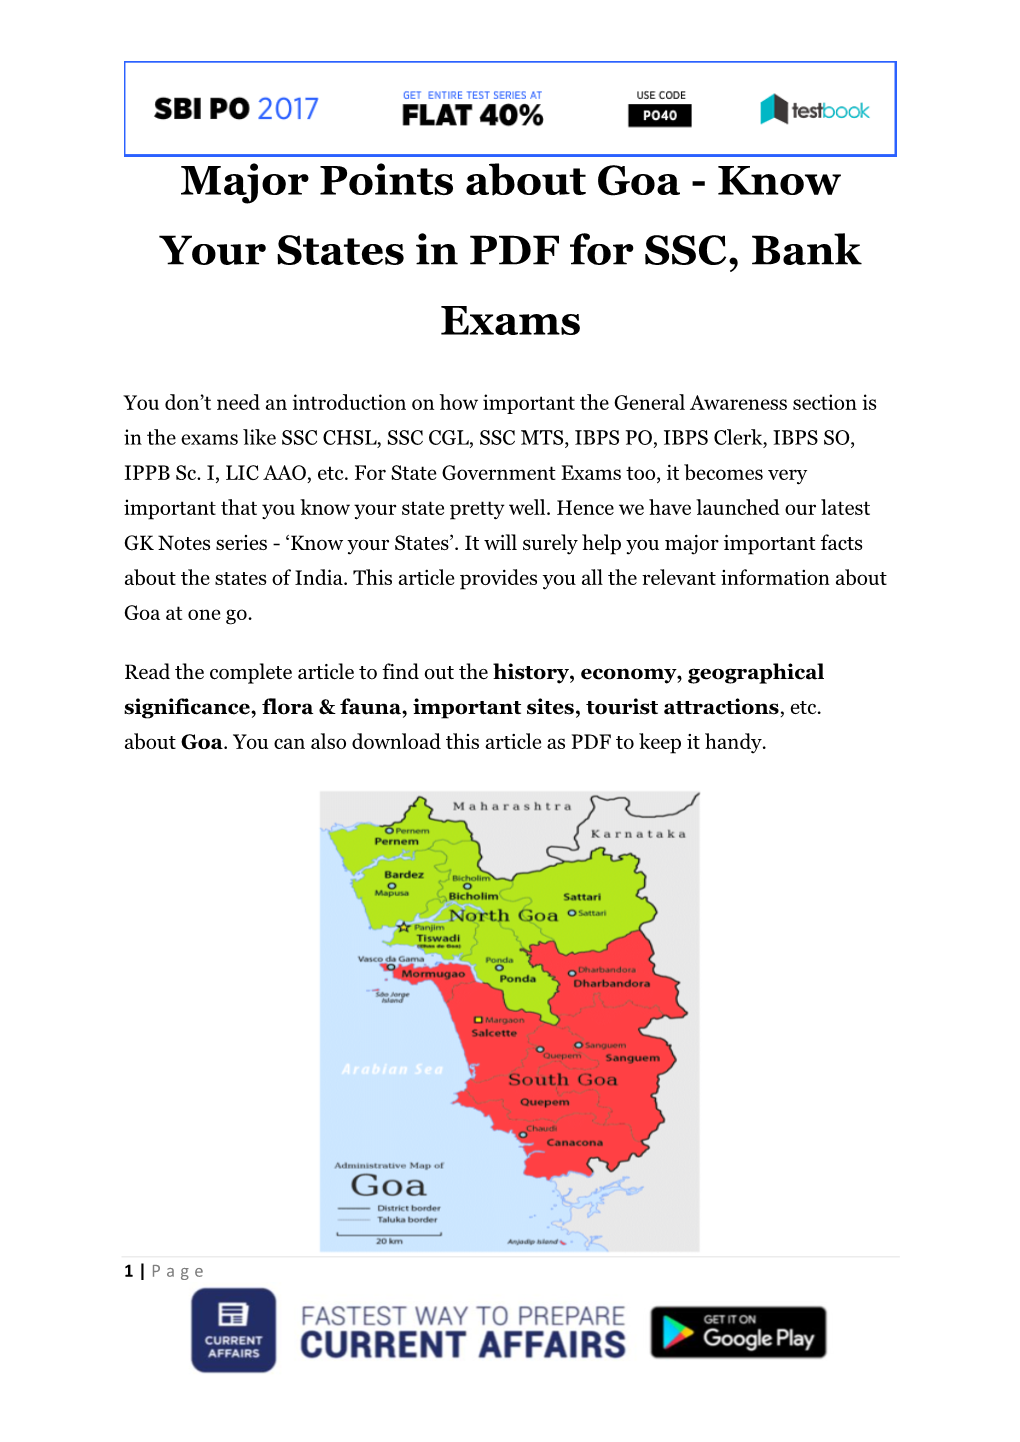 Major Points About Goa - Know Your States in PDF for SSC, Bank Exams